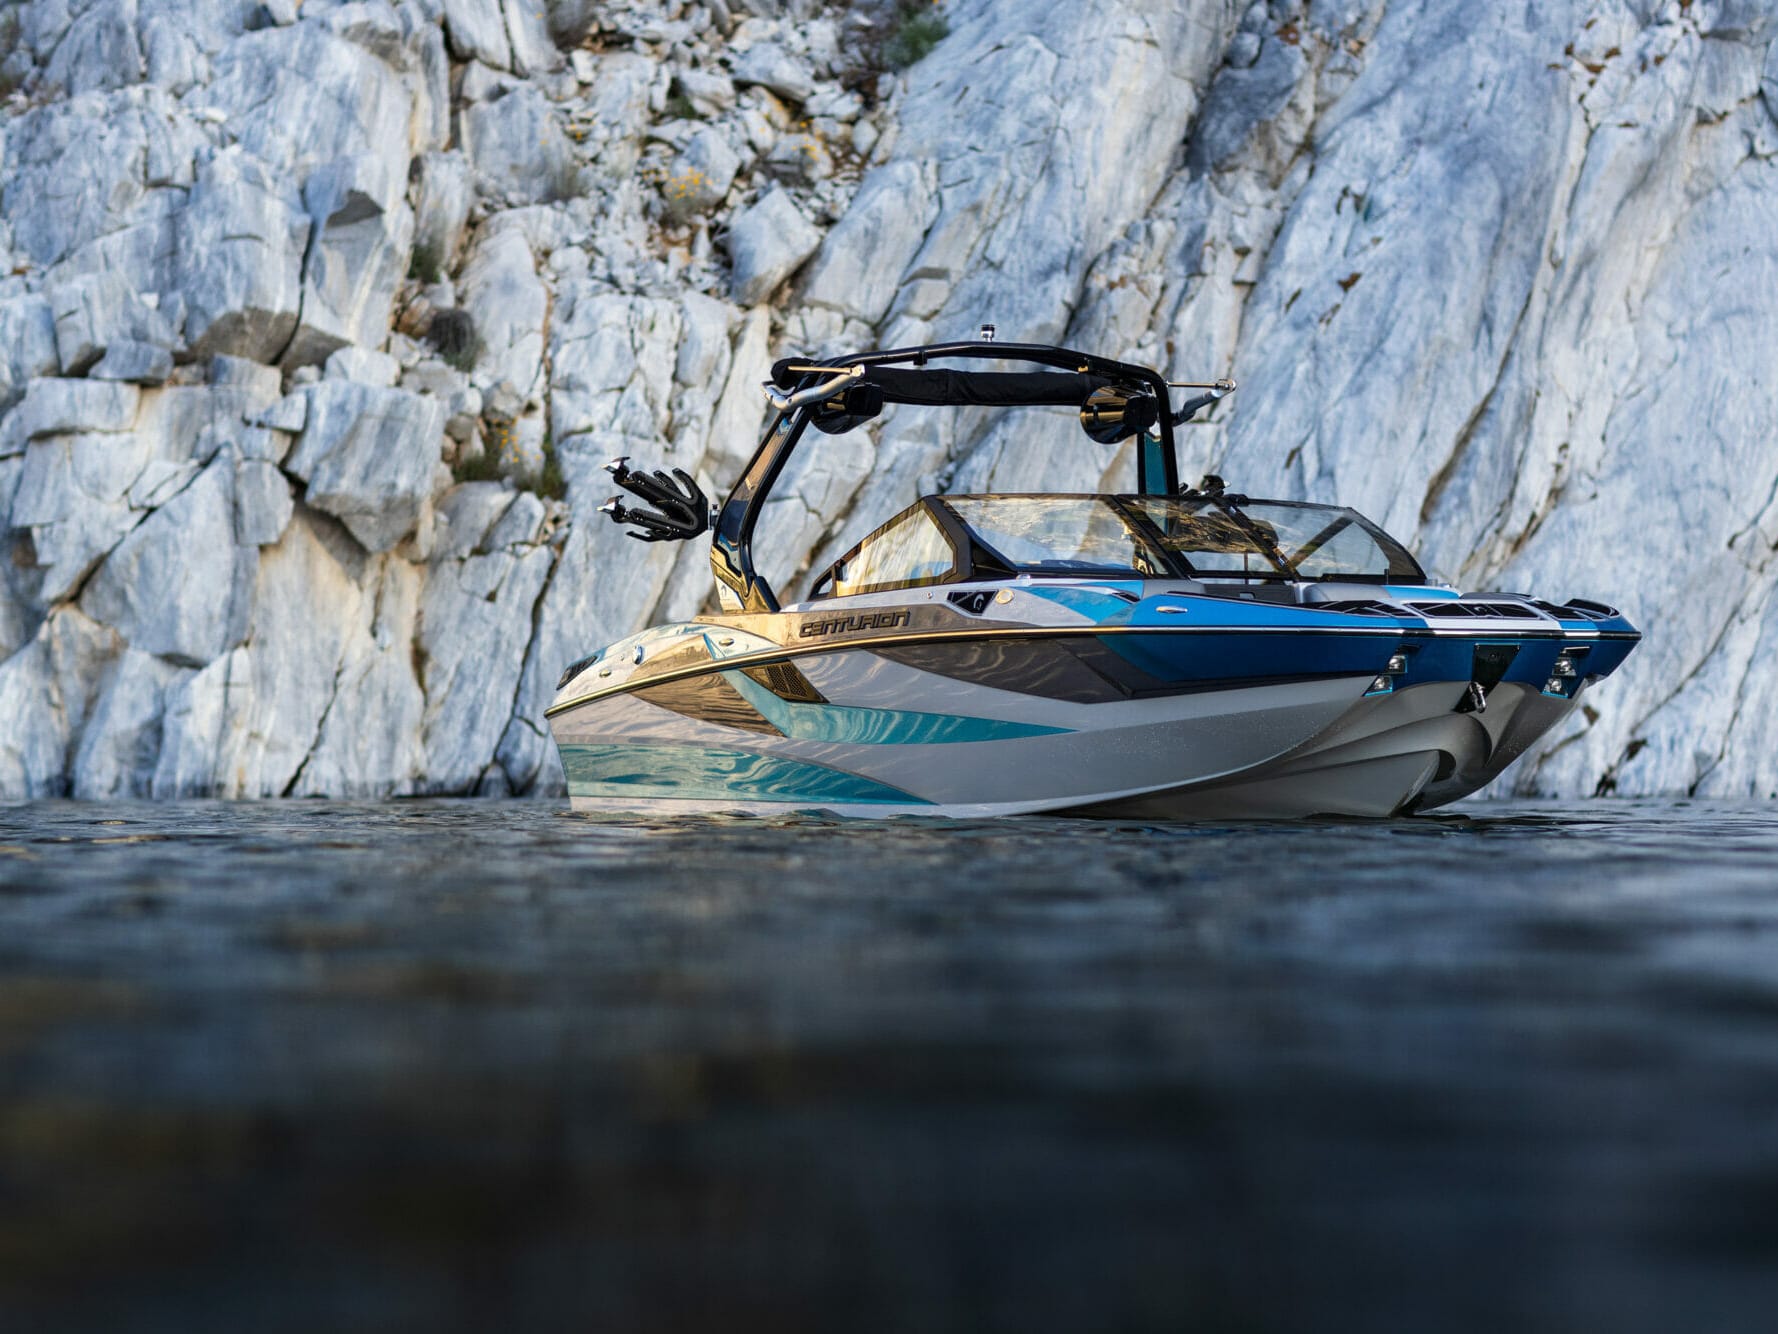 A wakesurf boat is floating in the water near a cliff.